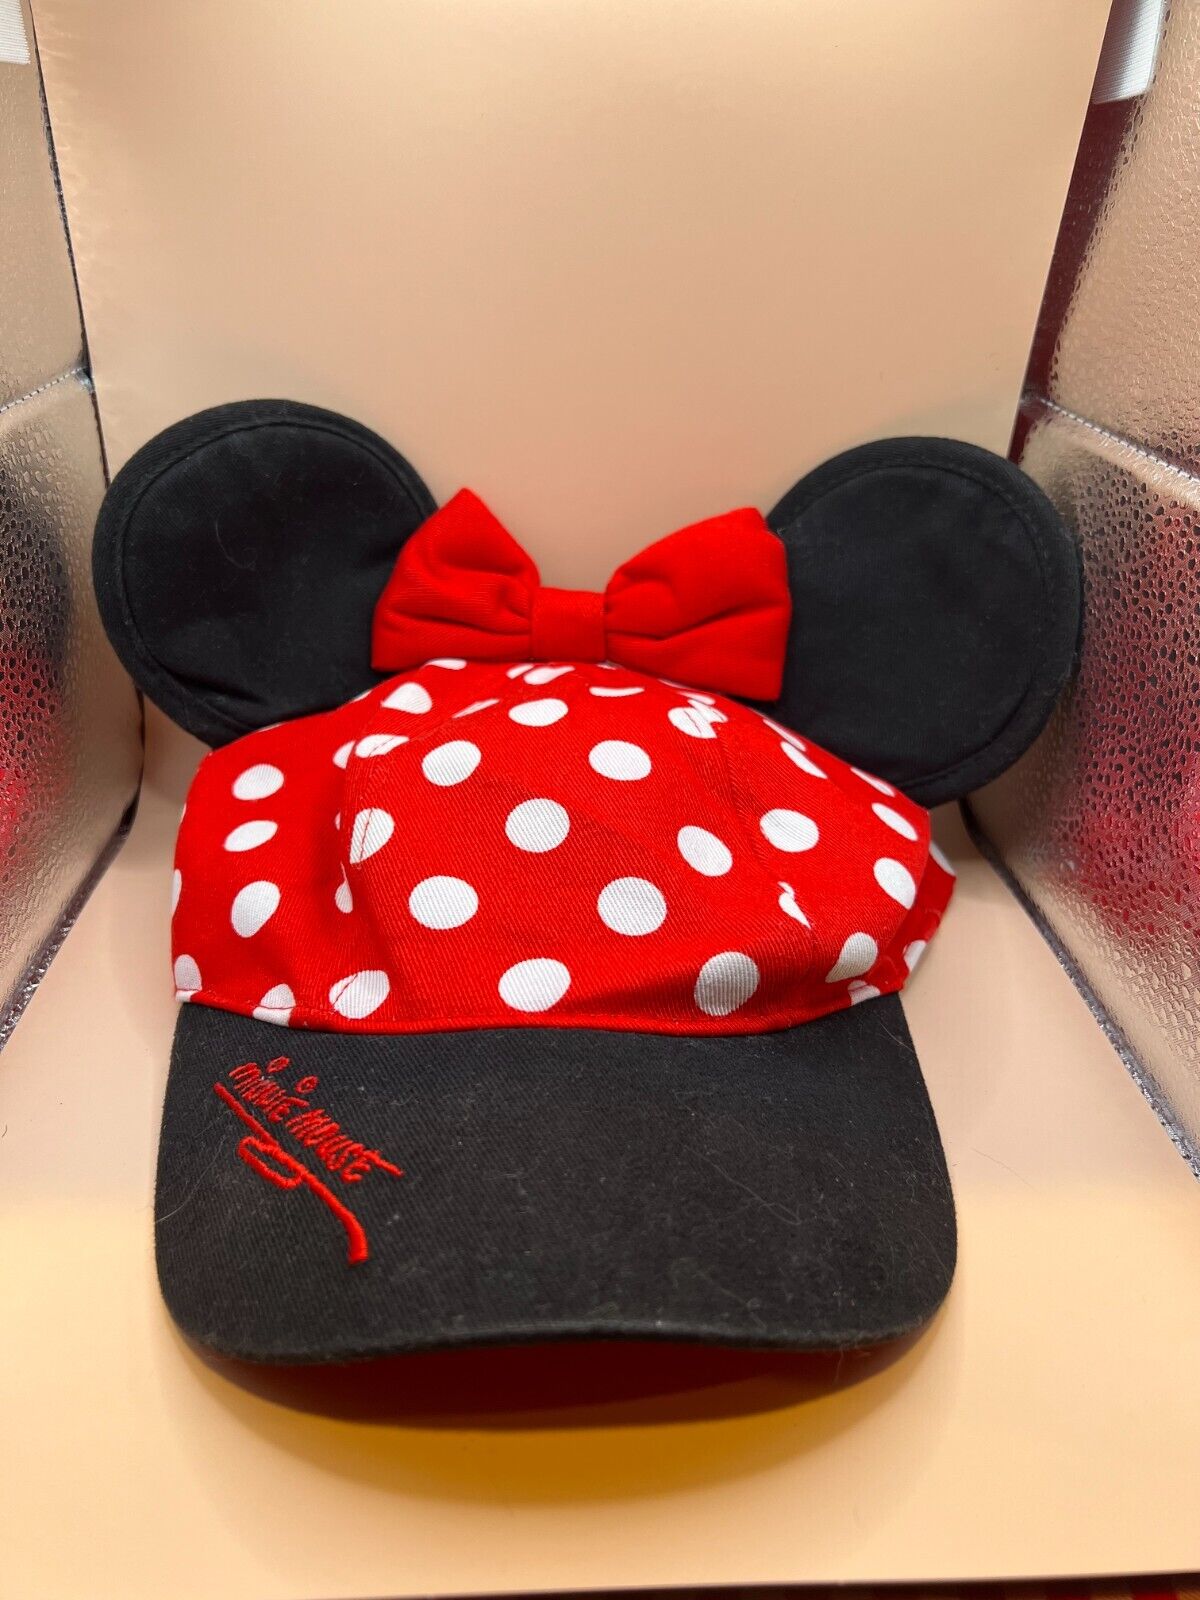 Disney Minnie Mouse Baseball Hat Cap With Ears Youth Polka Dots Red EUC  FCL